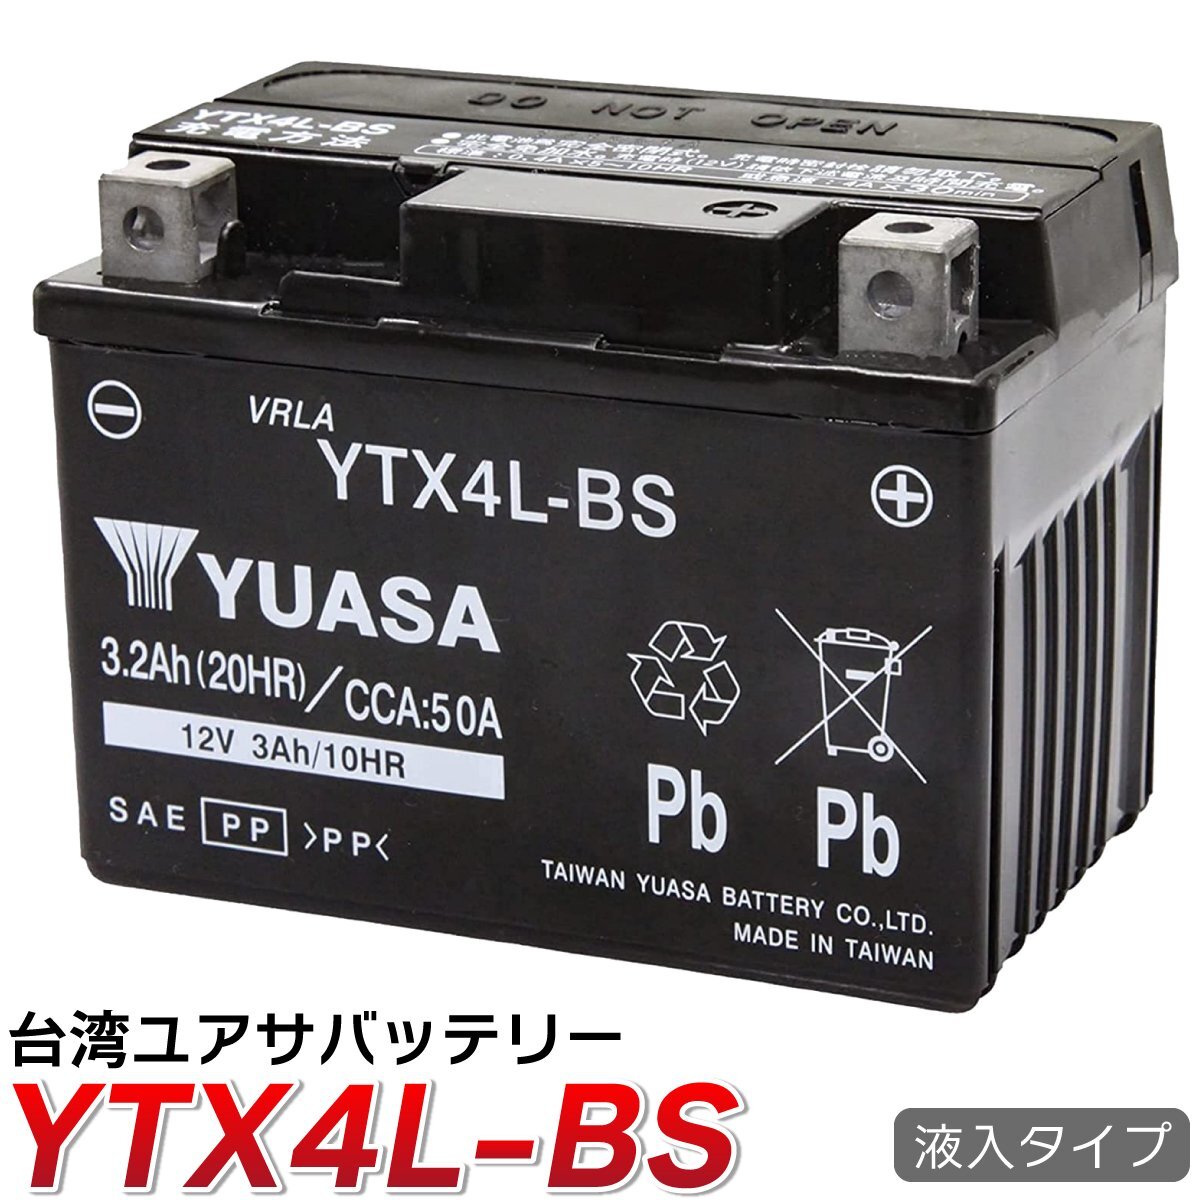  bike battery Taiwan YUASA YTX4L-BS interchangeable YT4L-BS FT4L-BS new goods with guarantee fluid go in charge settled let's 4 Palette let's 5 Giorno AF70 free shipping 